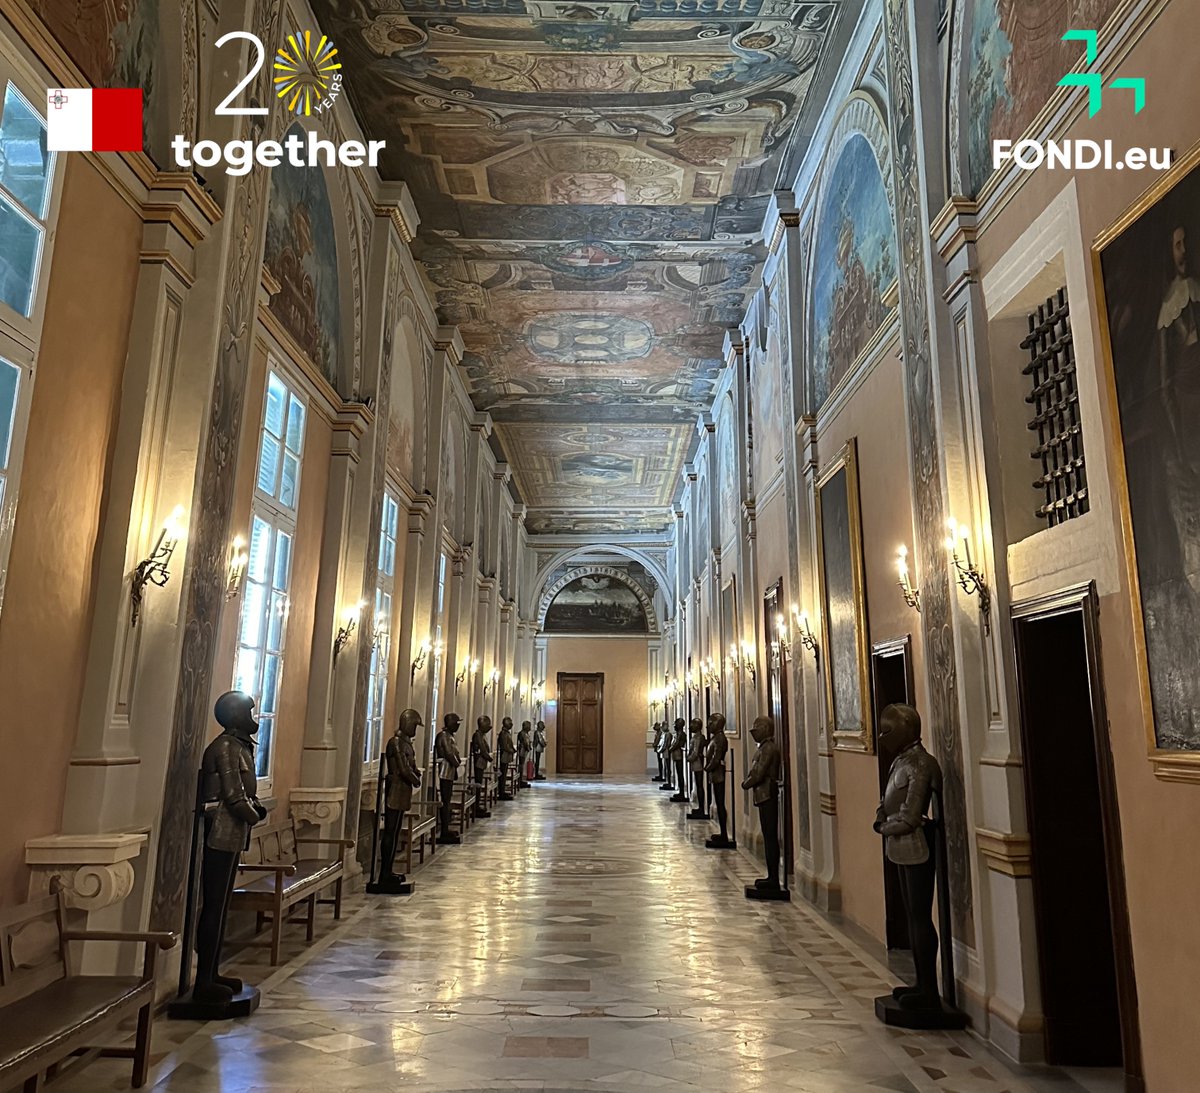 To celebrate Malta’s 20th Anniversary in the EU, experience a journey through time at the Grand Master’s Palace​, Valletta Special Opening and immerse yourself in the history of the Palace’s splendour on 5th May​

#MaltaEU20 #ERDF

@PublicServiceMT | @EUinmyRegion